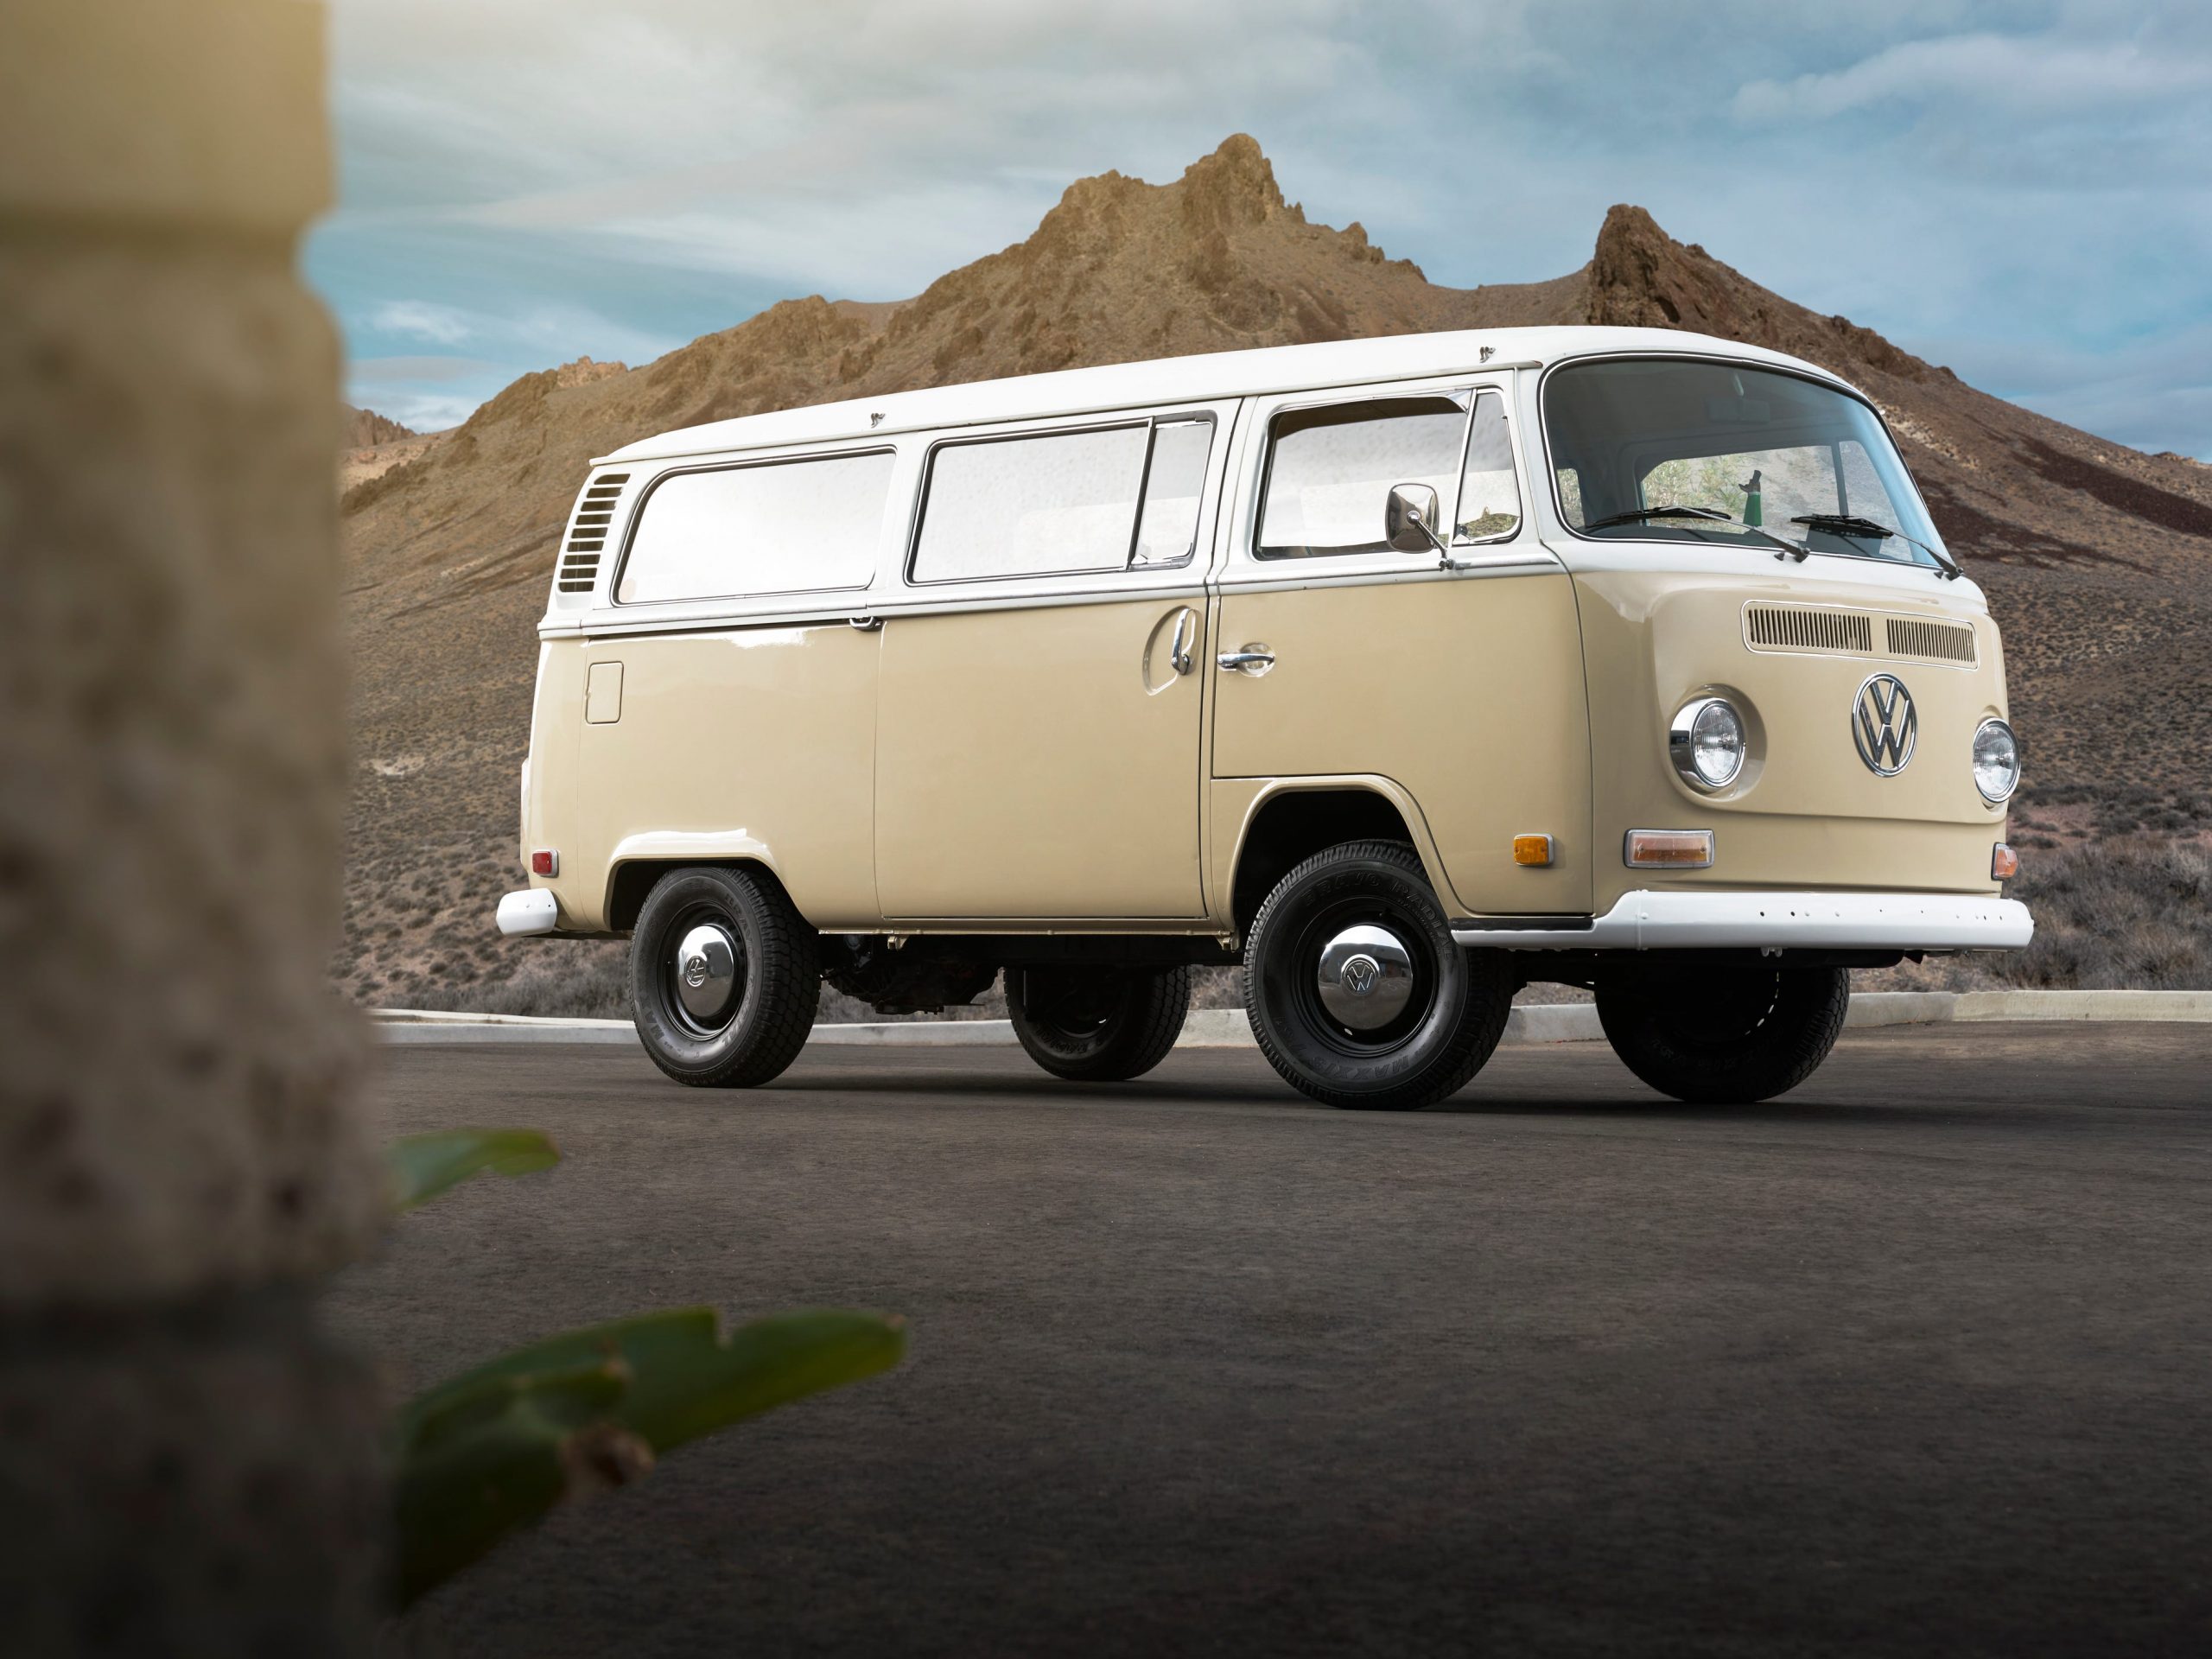 "Project e-Bus:" Volkswagen commissioned west coast electric vehicle conversion specialist EV West to construct an electrified Volkswagen Type 2 Bus in 2019.